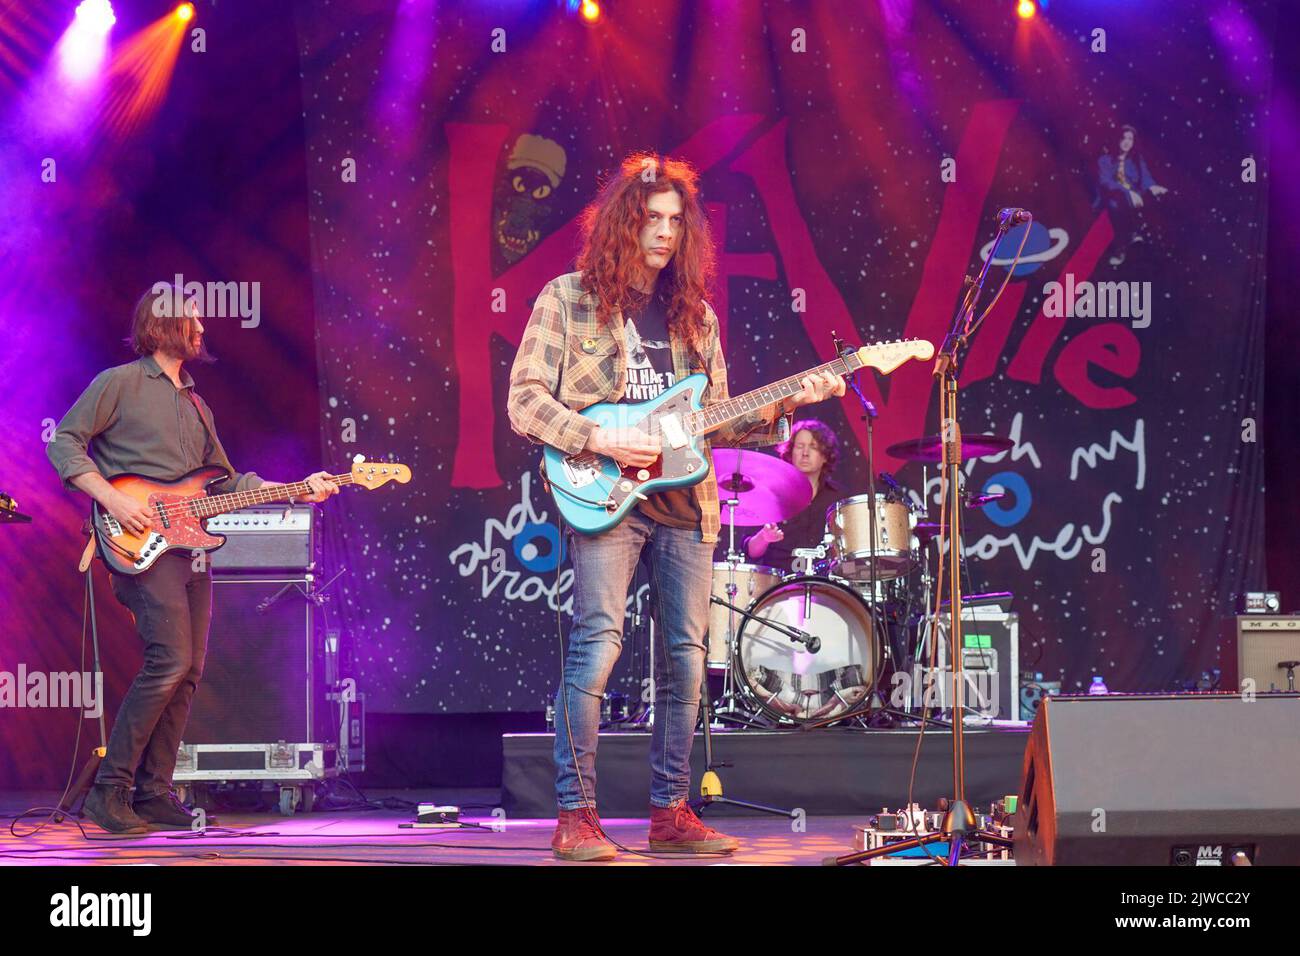 Dorset, UK. Sunday, 4 September, 2022. Kurt Vile and the Violators performing at the 2022 End of the Road Festival. Photo: Richard Gray/Alamy Stock Photo